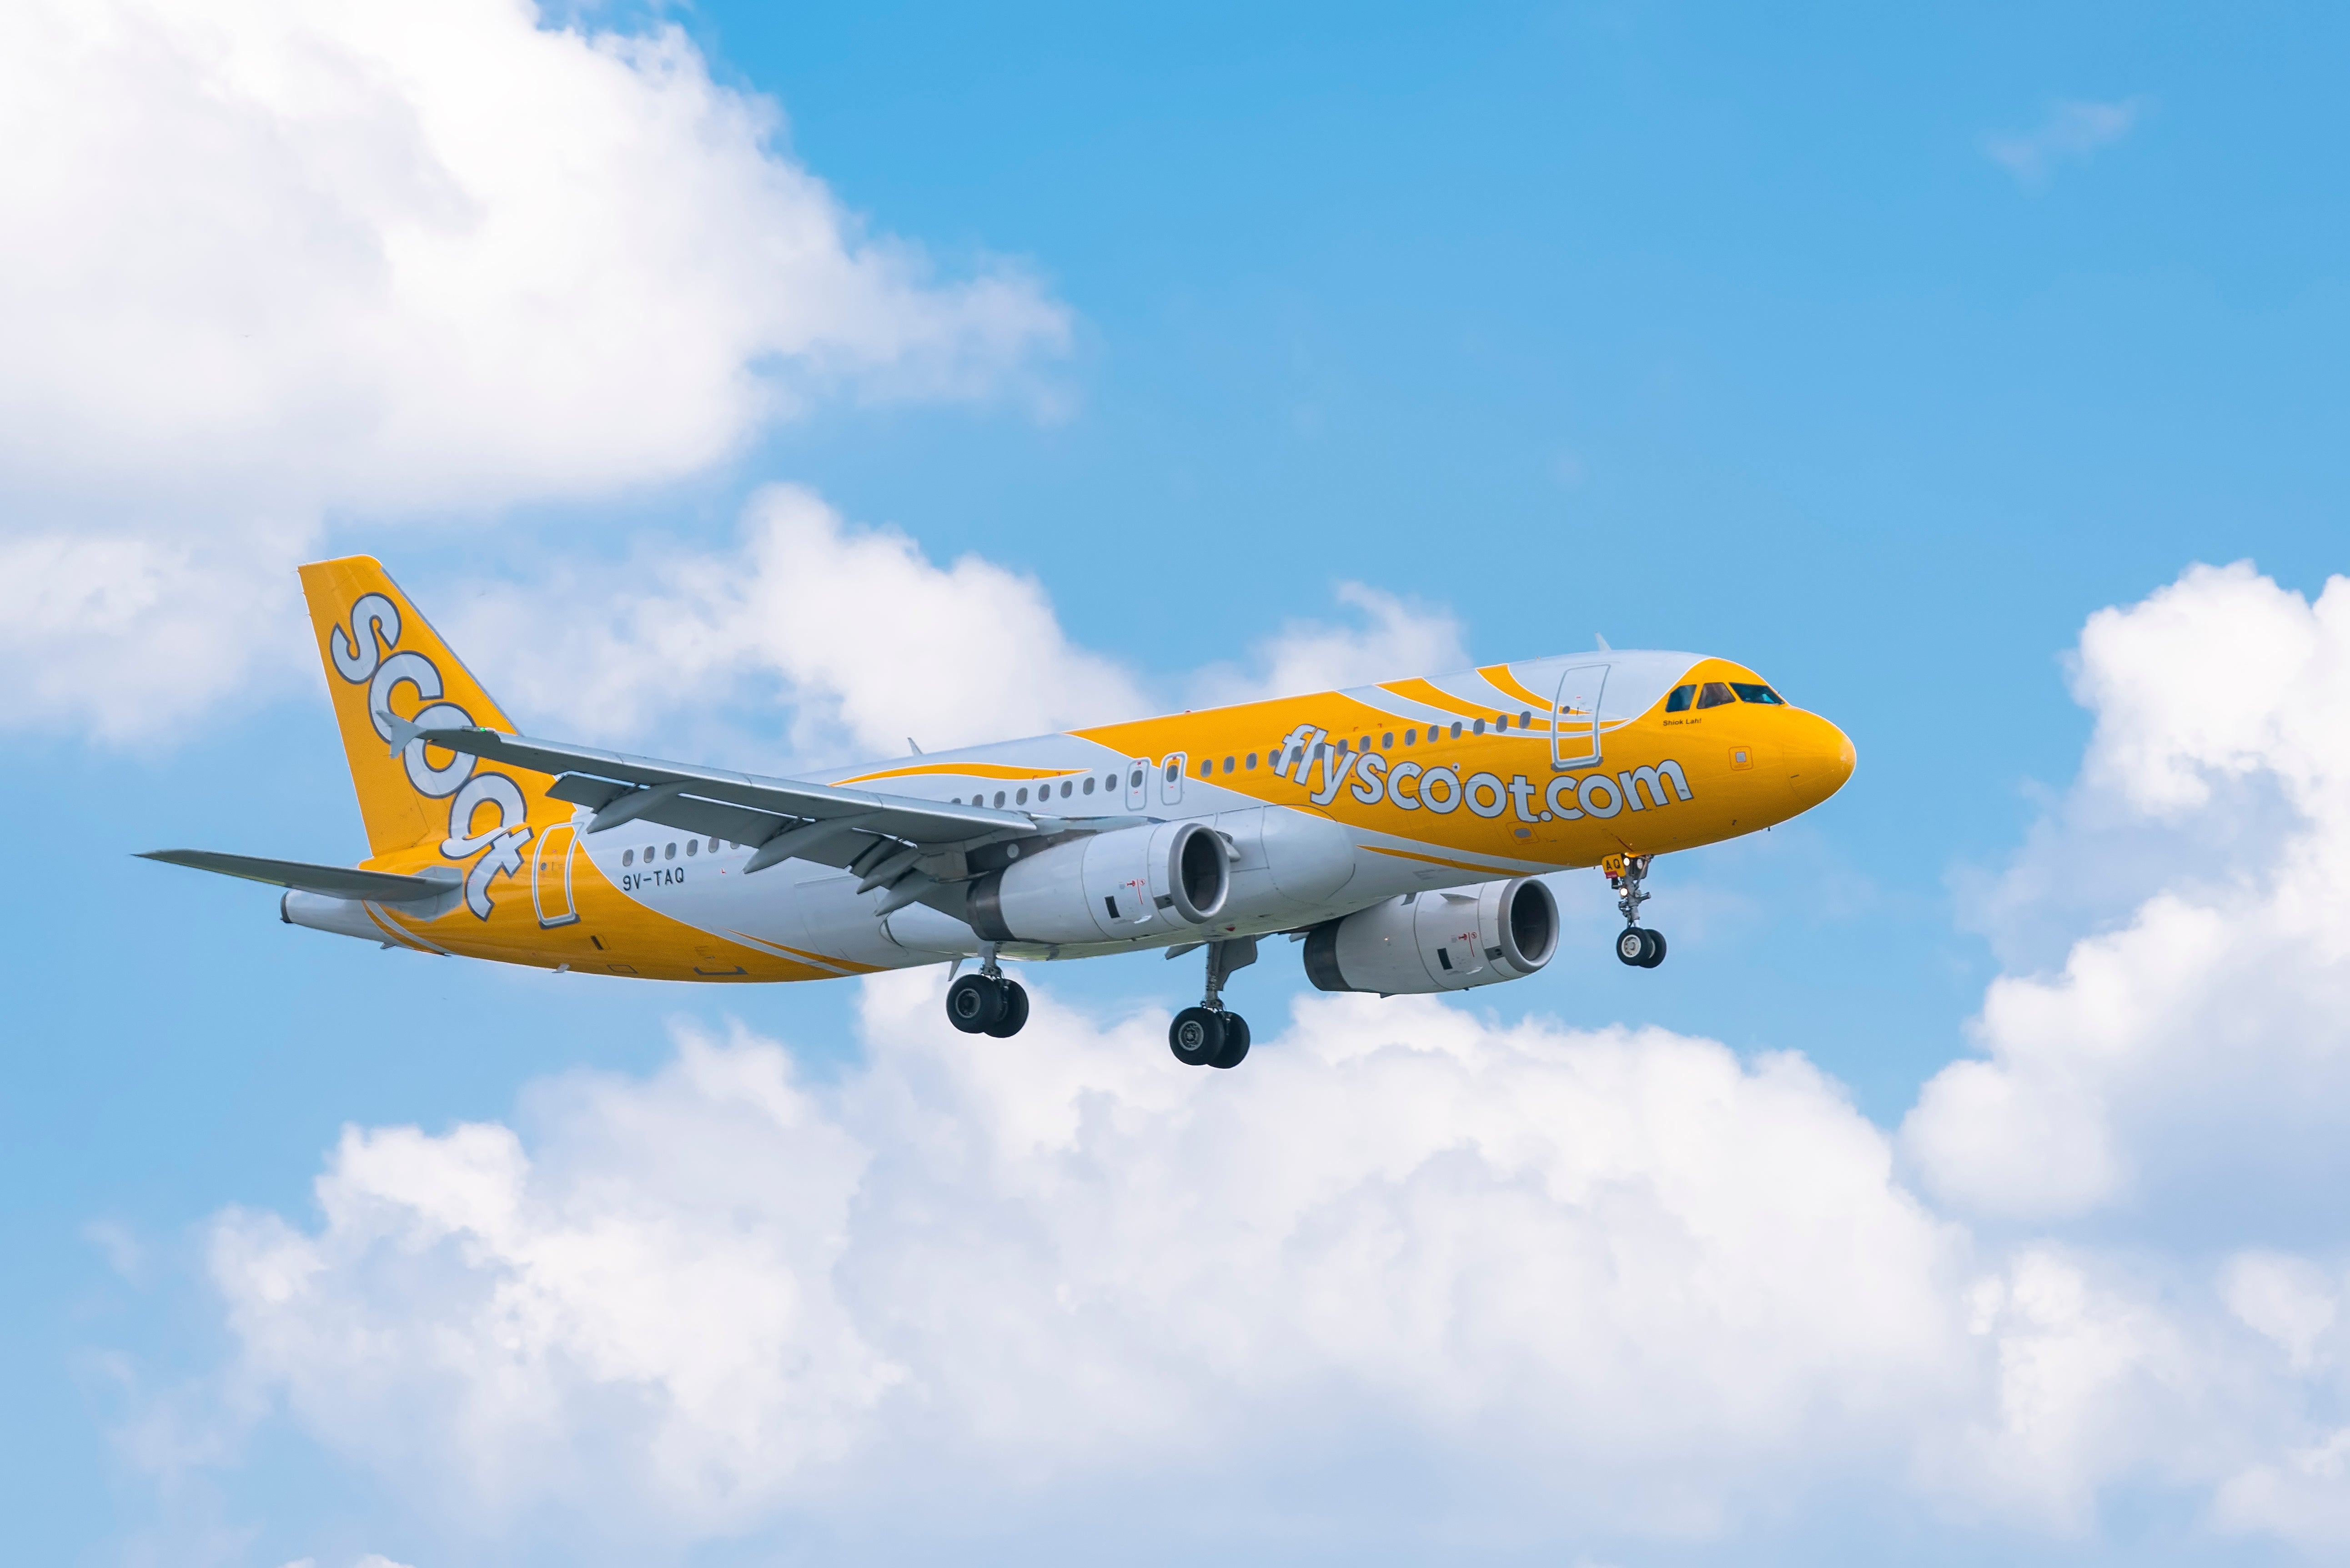 Scoot flight takes off hours early, leaving 35 passengers behind The Independent